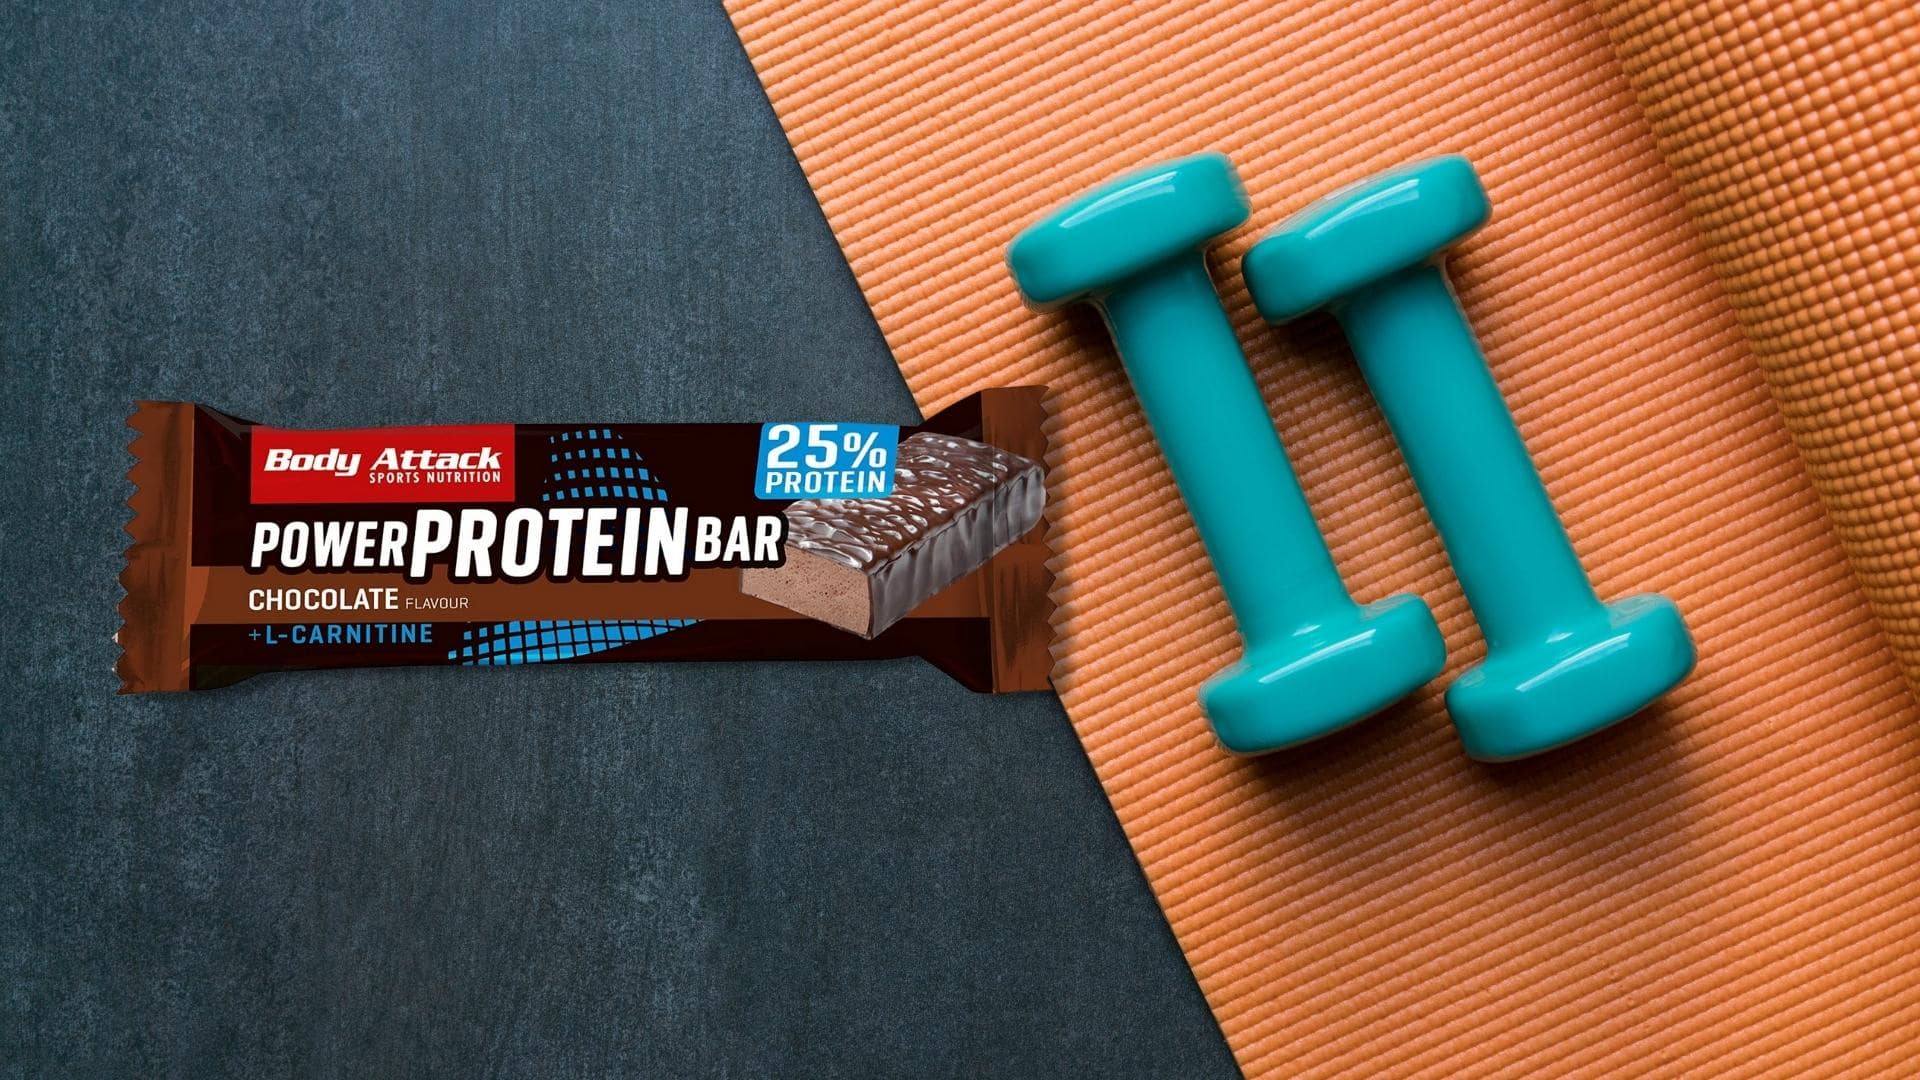 Body Attack - Power Protein Bar - Chocolate